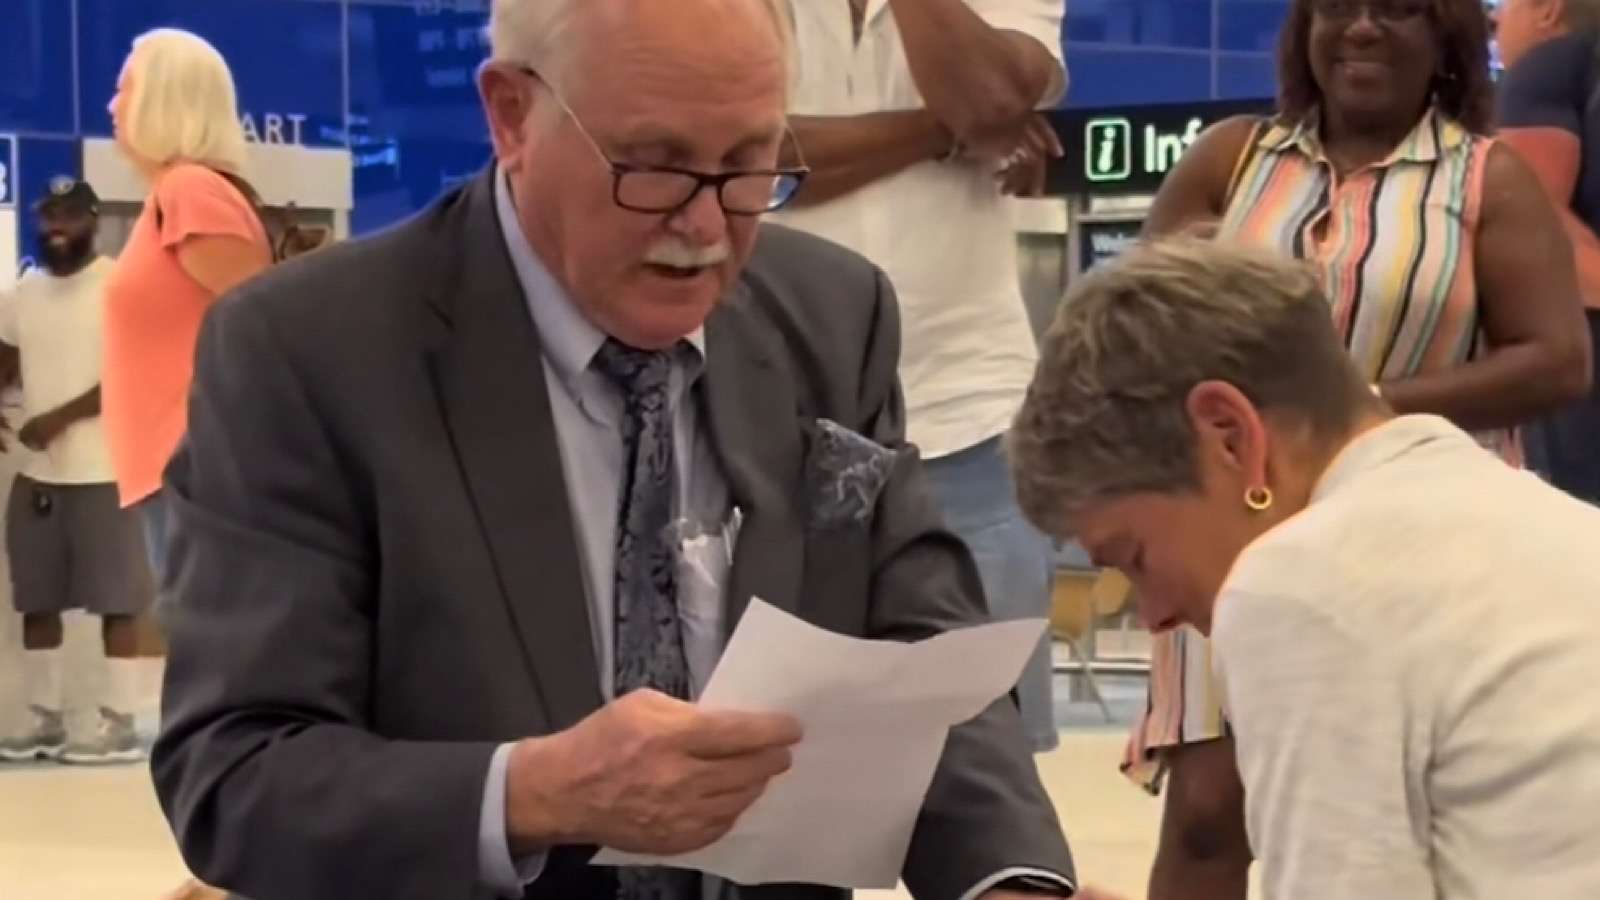 Elderly doctor proposes to his high school sweetheart in the middle of an airport.